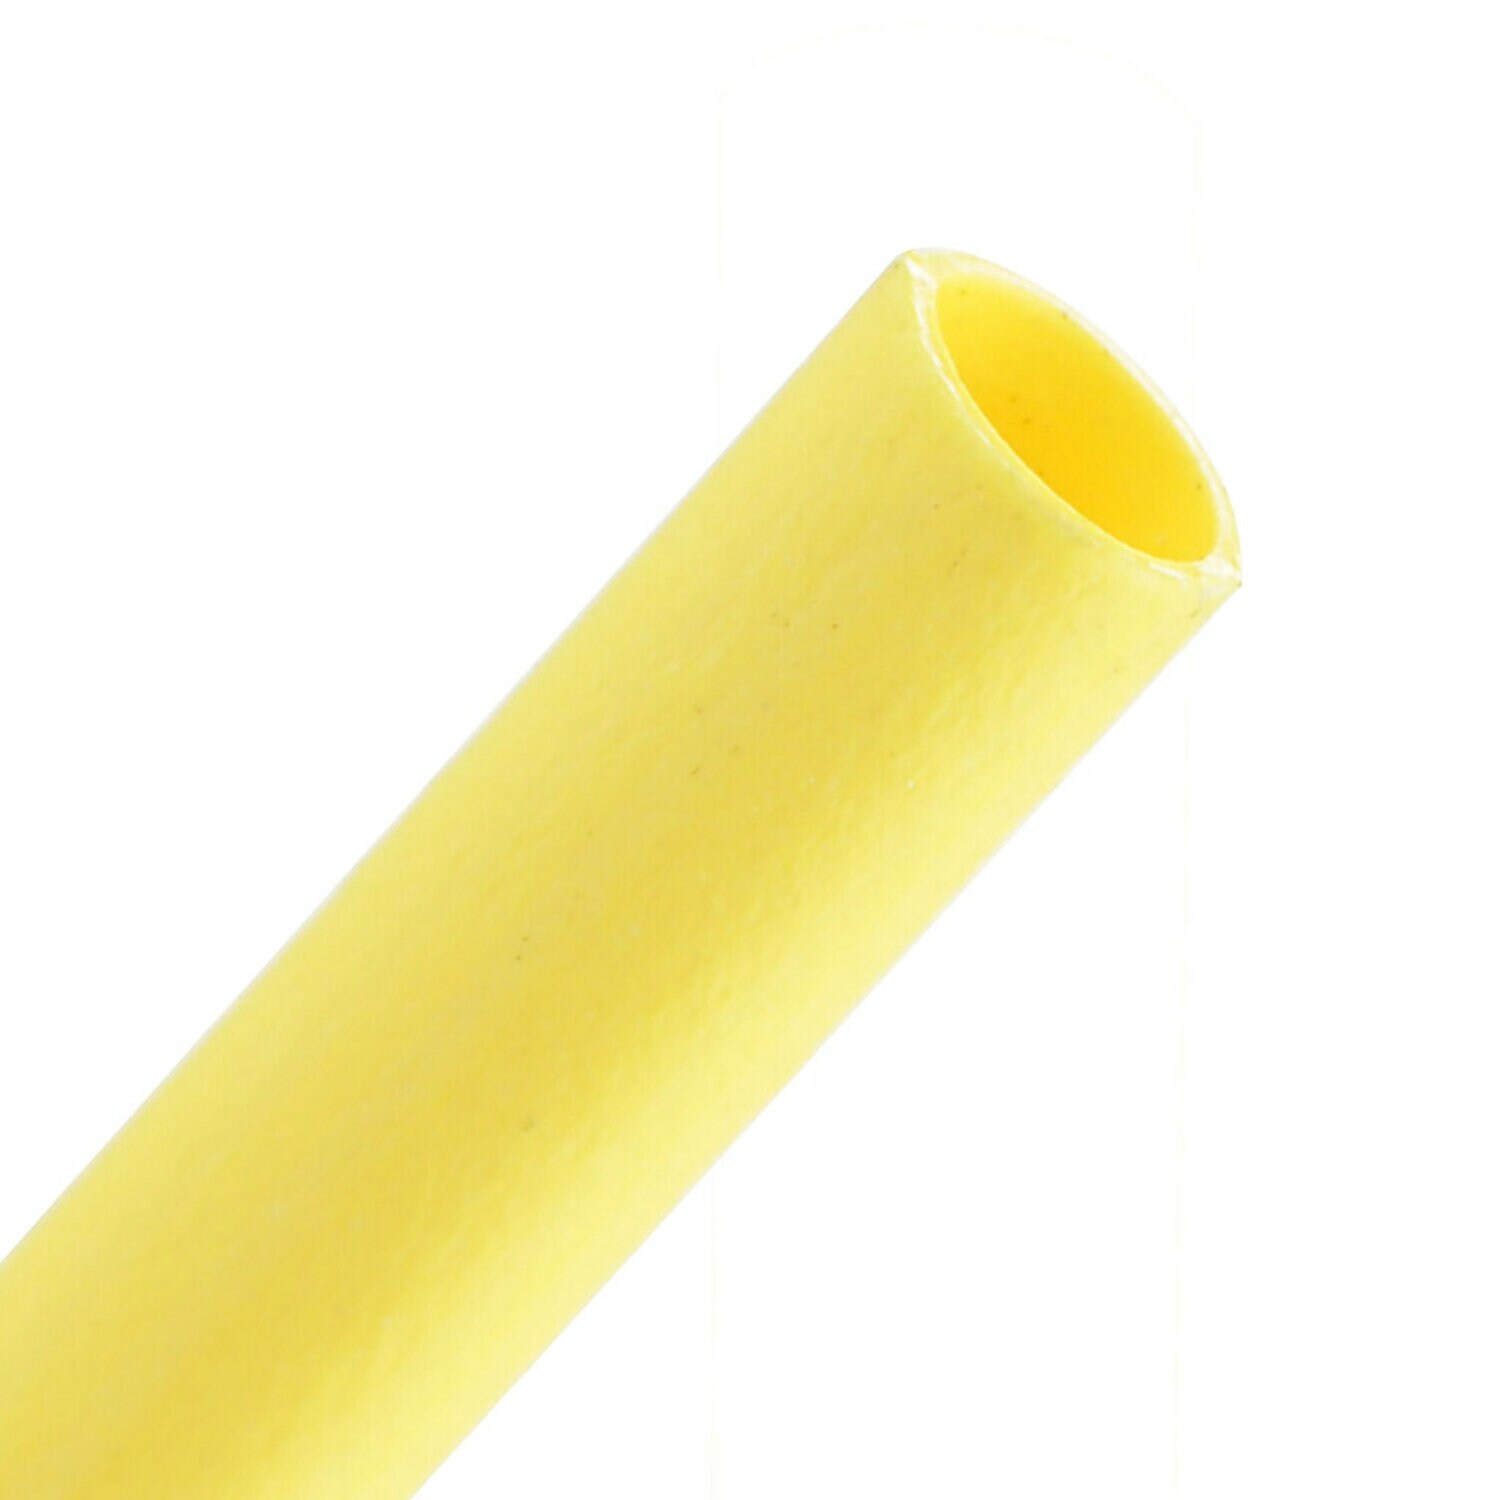 7010396246 - 3M Heat Shrink Thin-Wall Tubing FP-301-3/64-Yellow-1000`: 1000 ft spool
length, 3000 ft/case